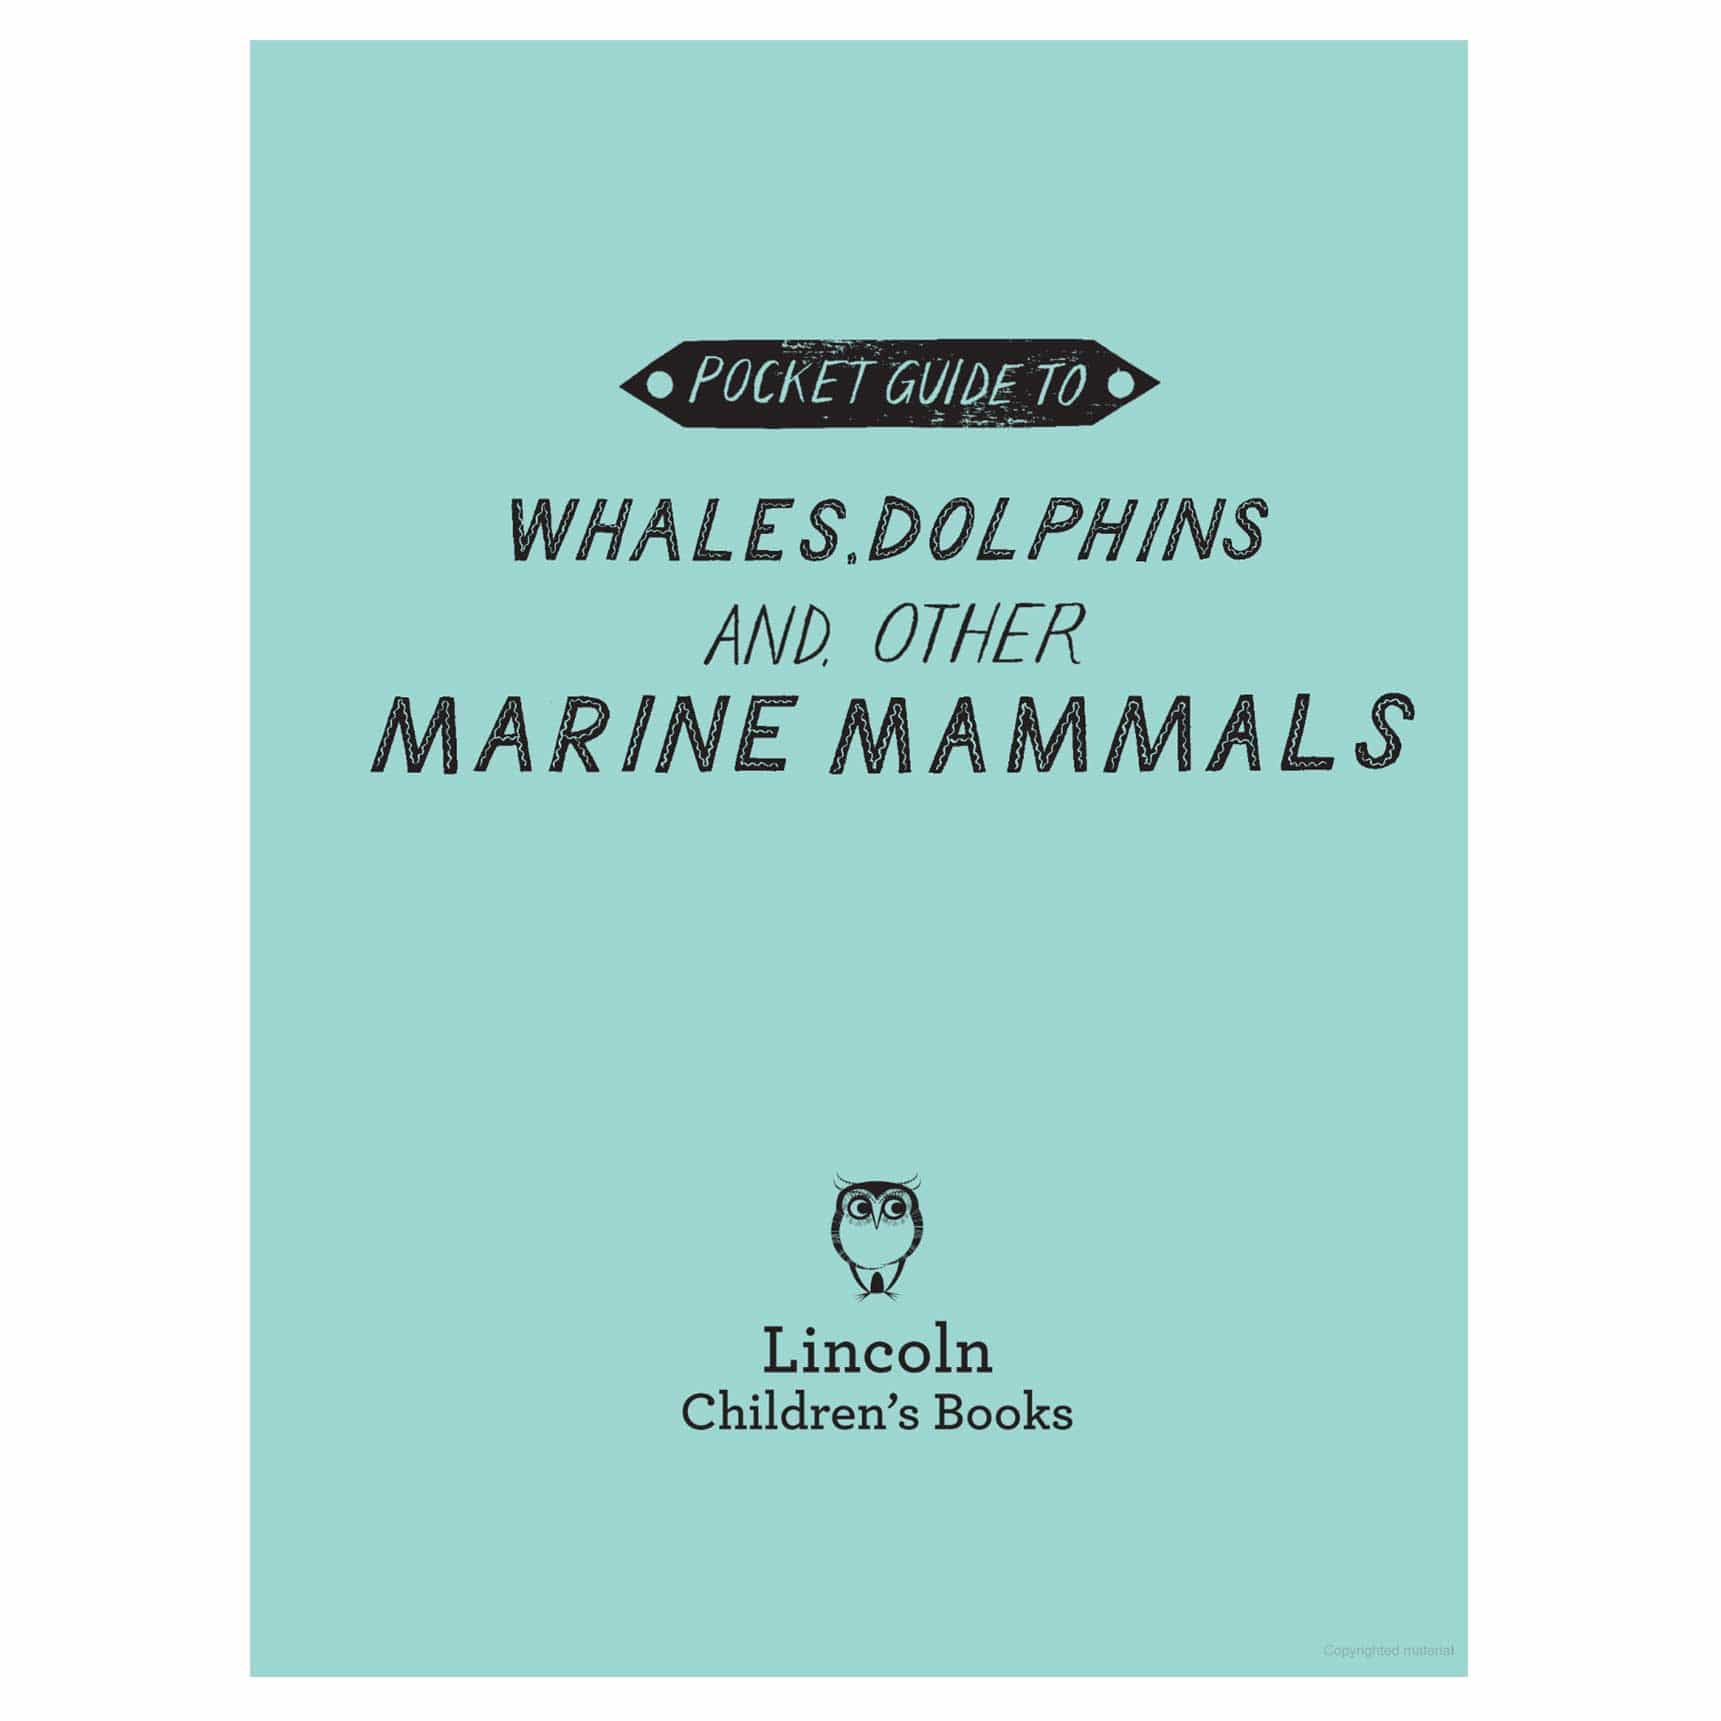 Pocket Guide to Whales, Dolphins, and other Marine Mammals